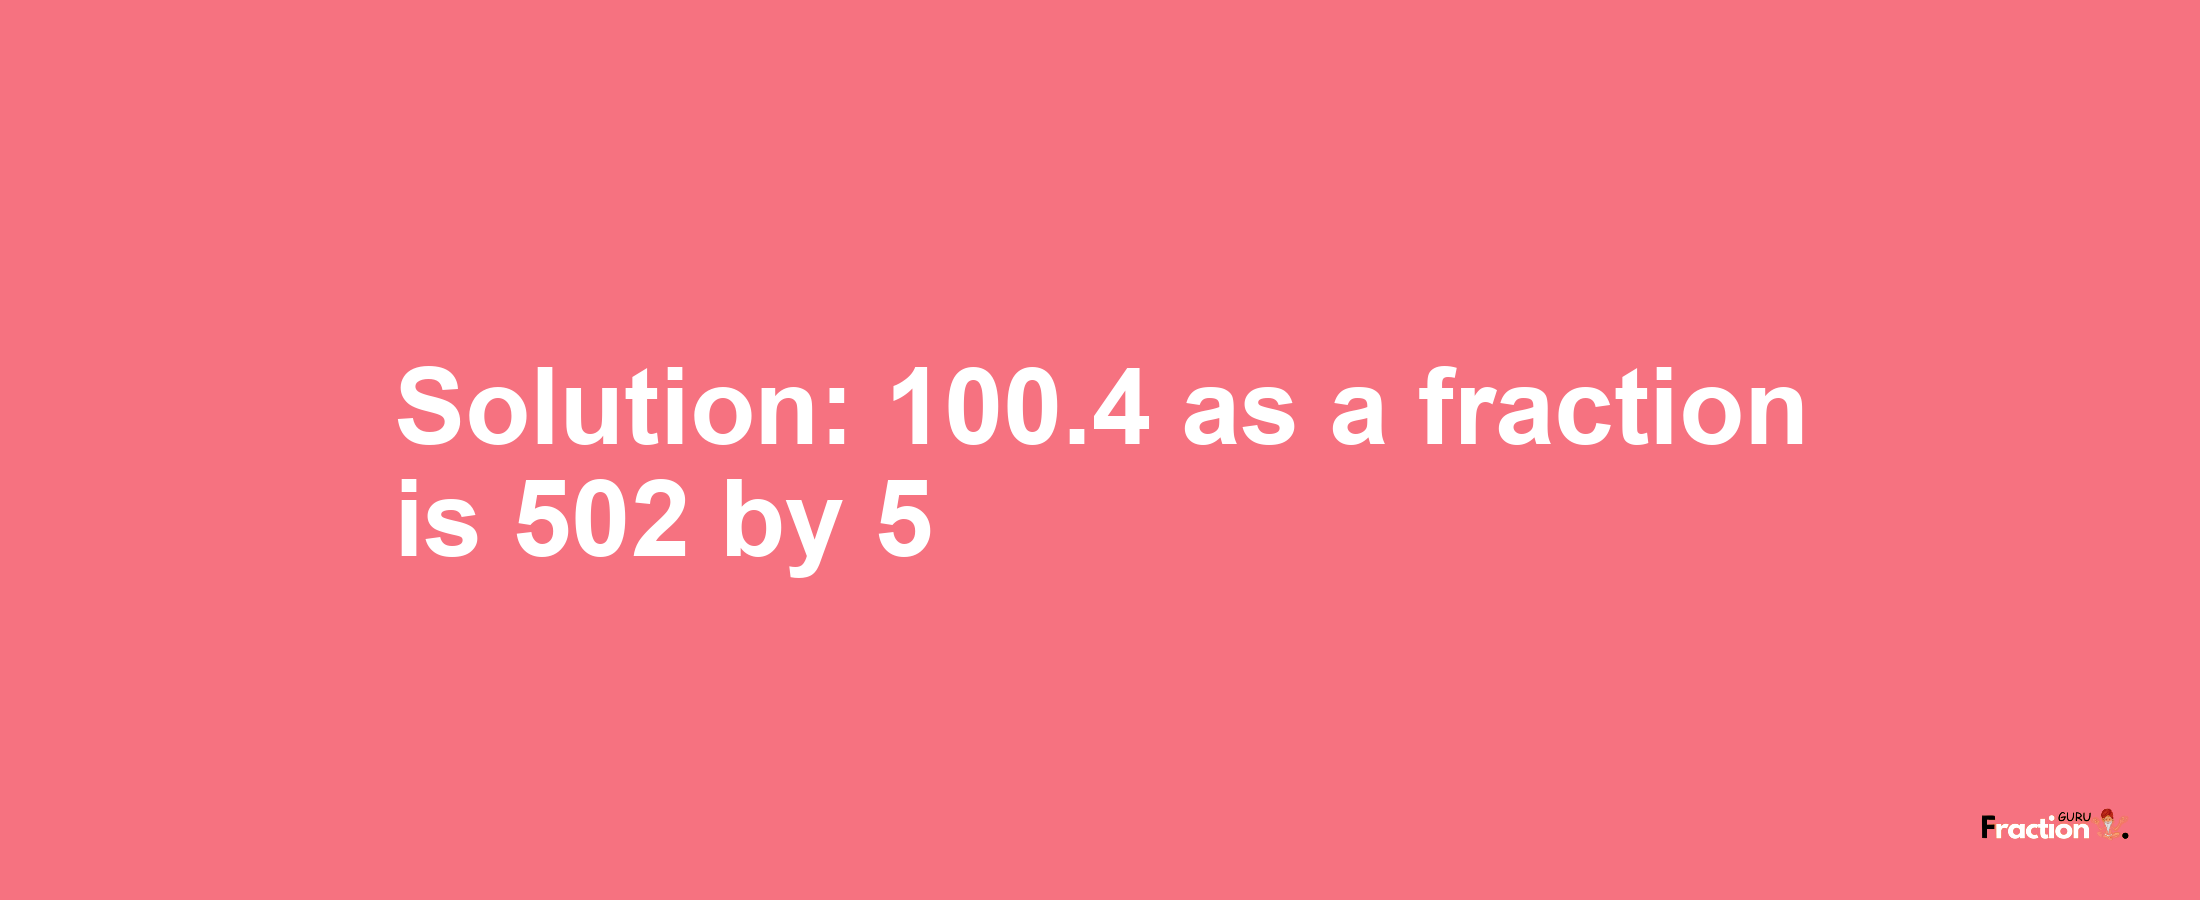 Solution:100.4 as a fraction is 502/5